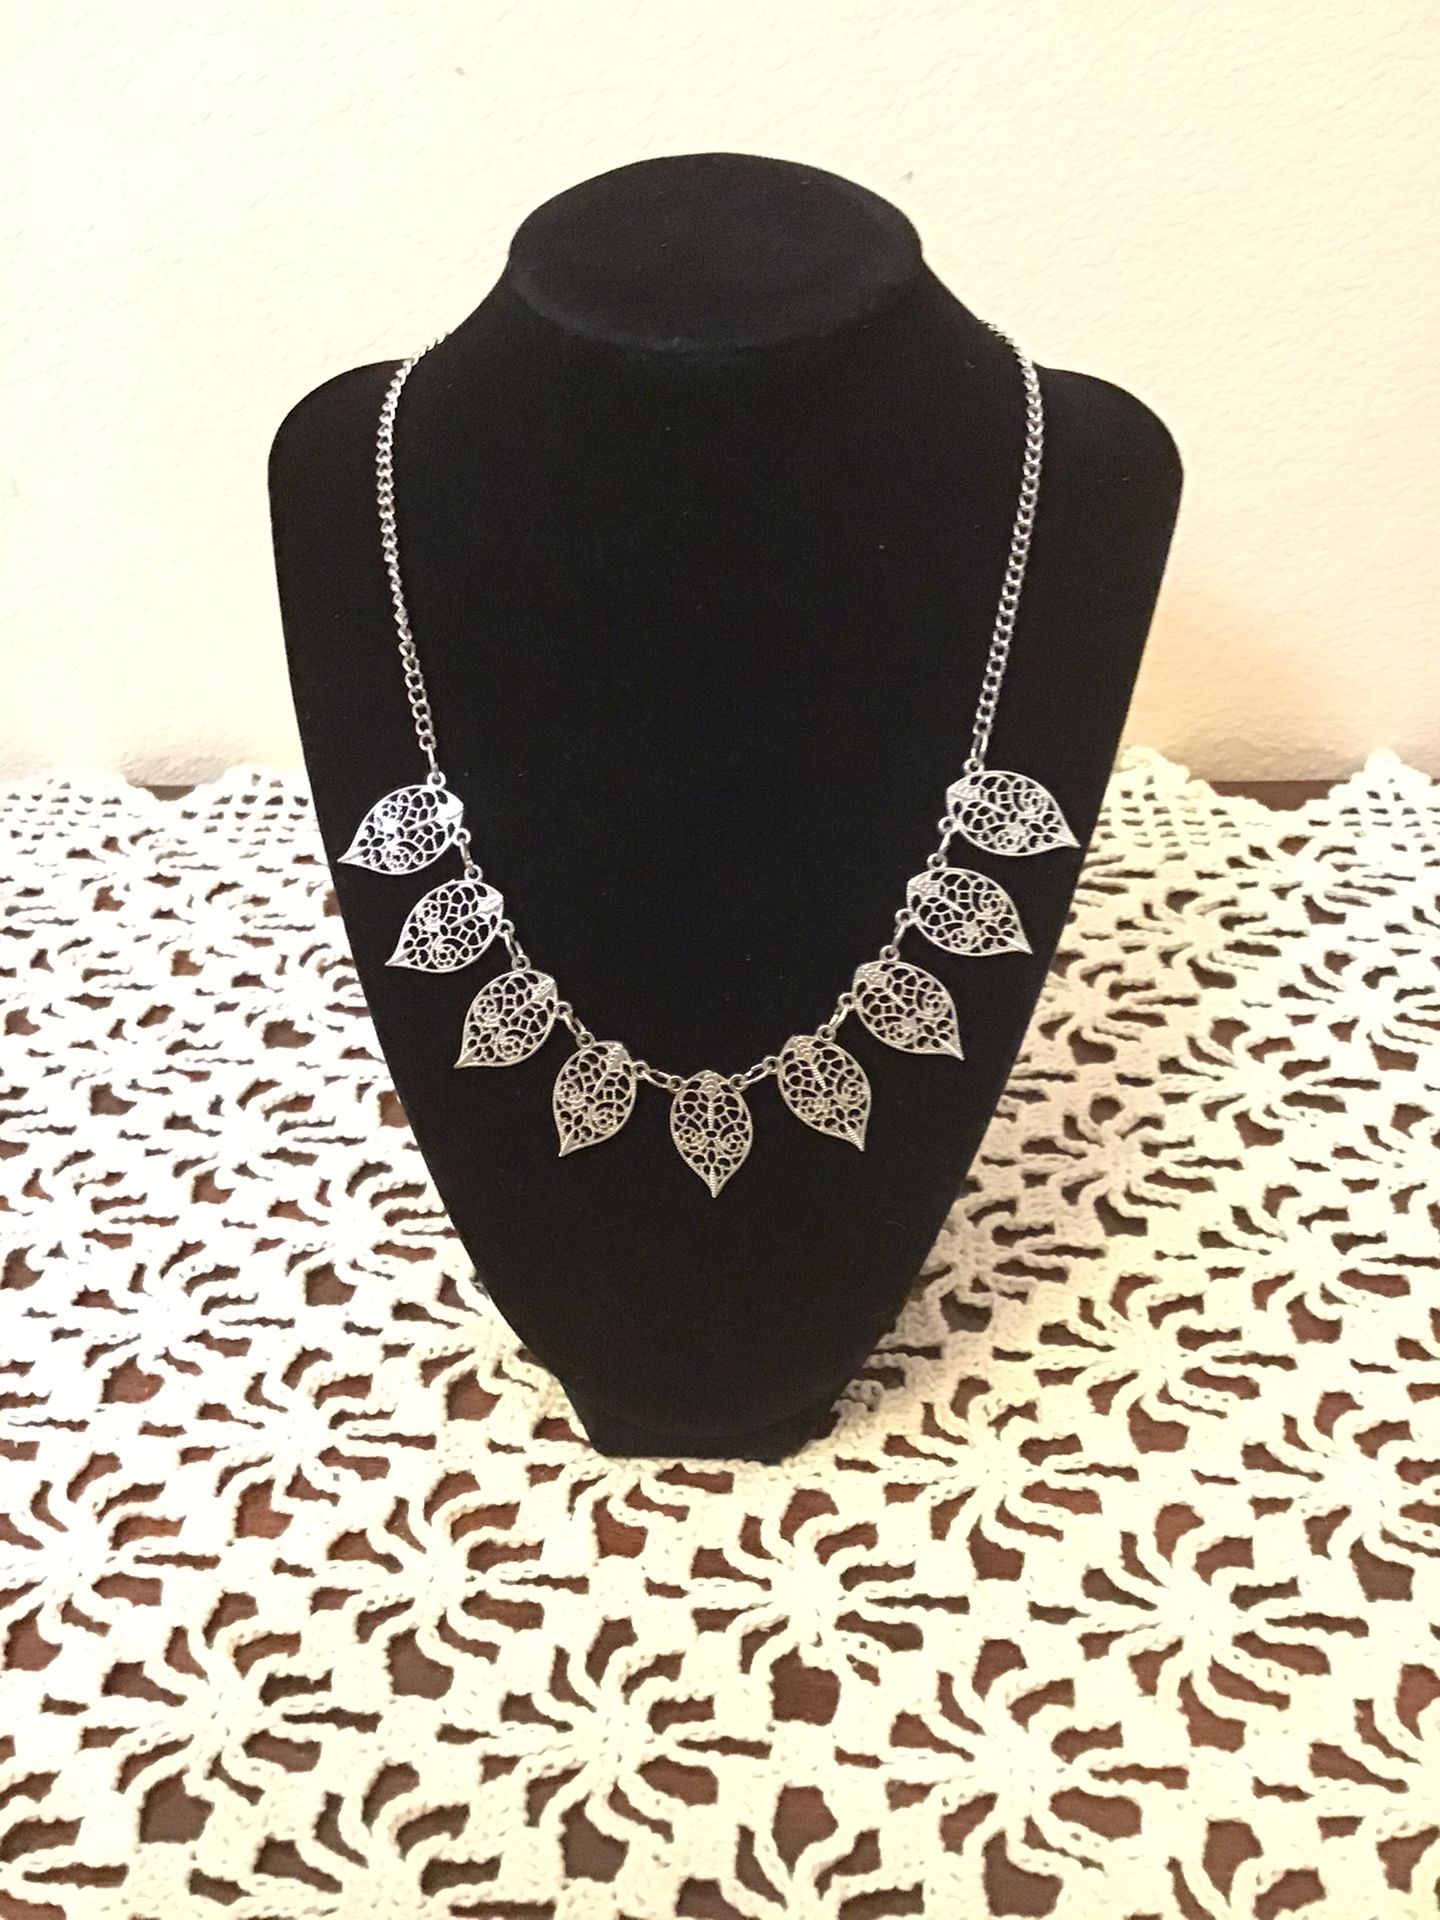 Vintage Beautiful Nine Filigree Leaves Charm silver tone chain necklace. 18” extends to 20”